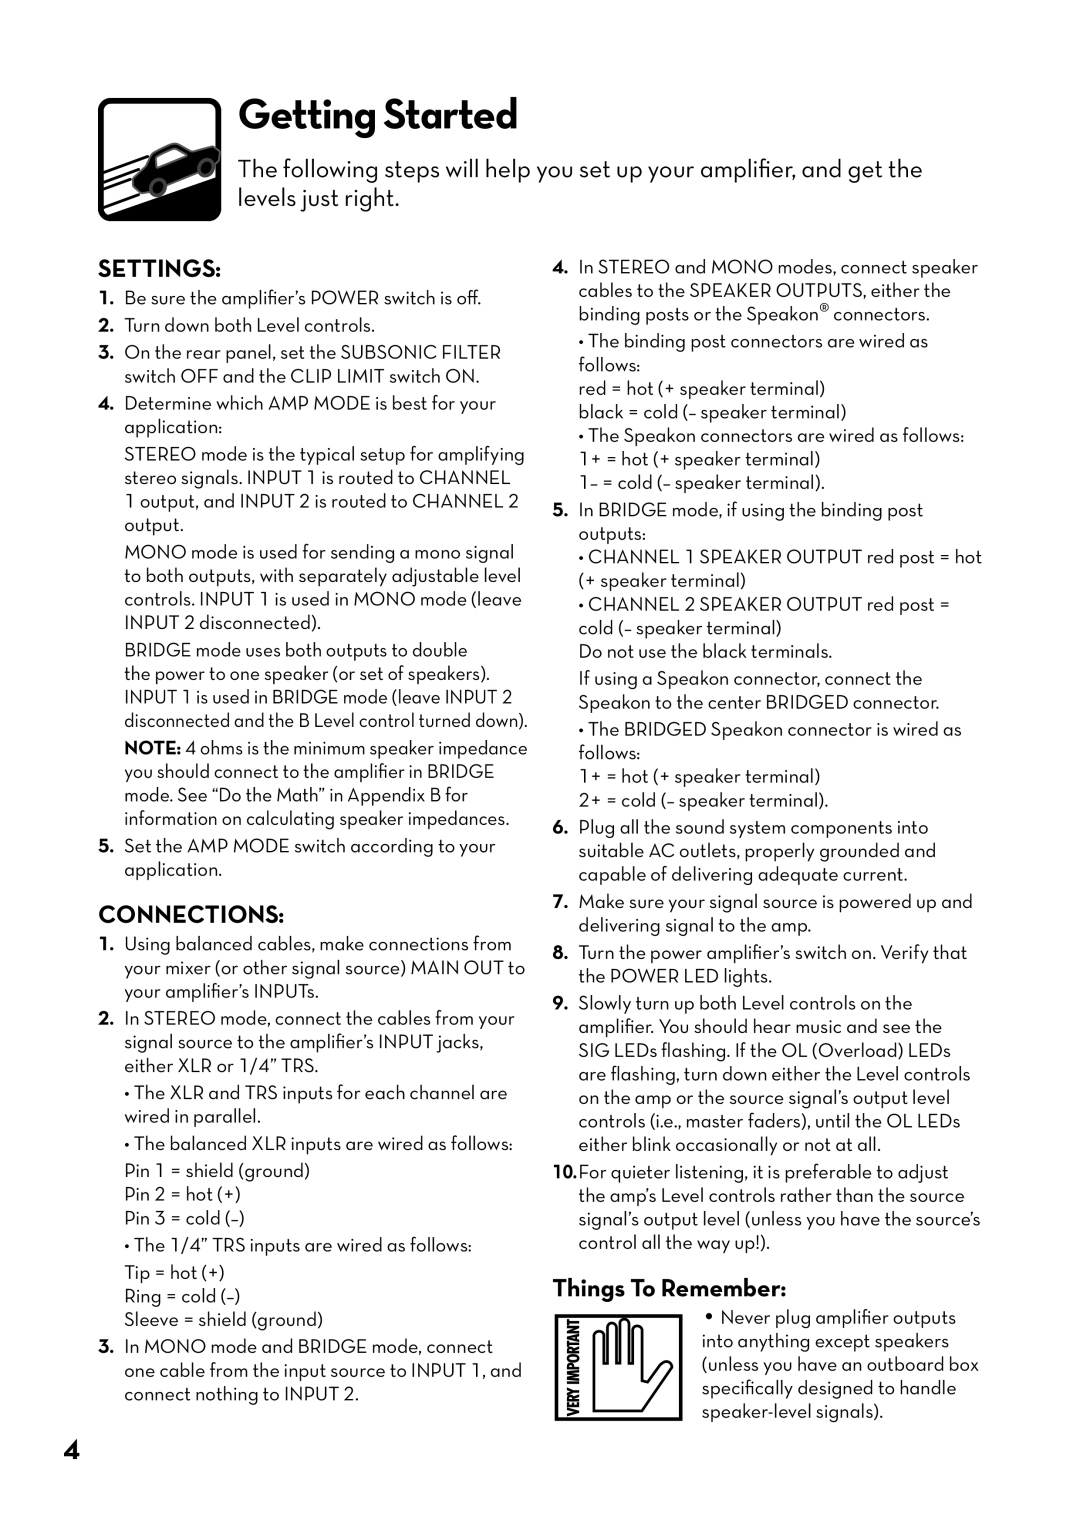 Tapco pmn manual Getting Started, Settings, Connections, Things To Remember 